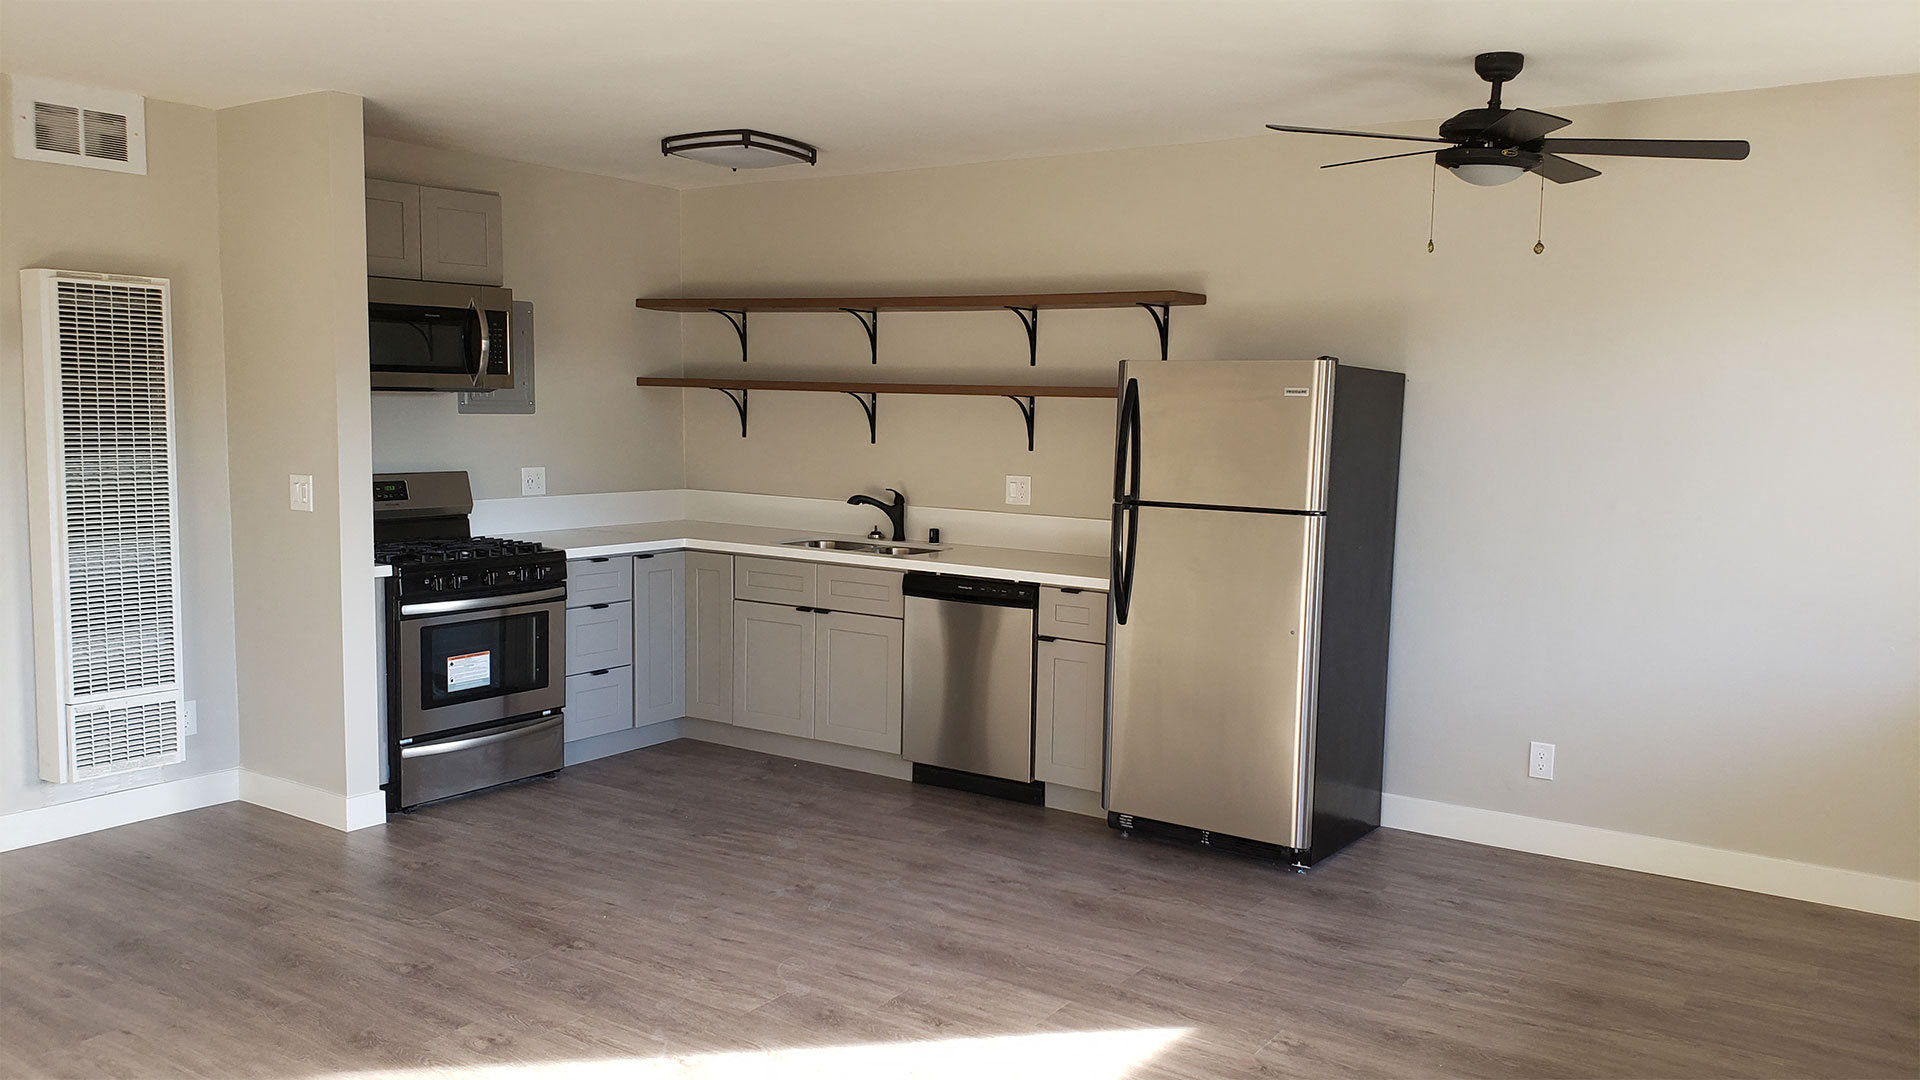 Kitchen Area with Shelf Units, White Countertops, Stainless Steel Appliances, Hardwood Flooring at Wilson Apartments